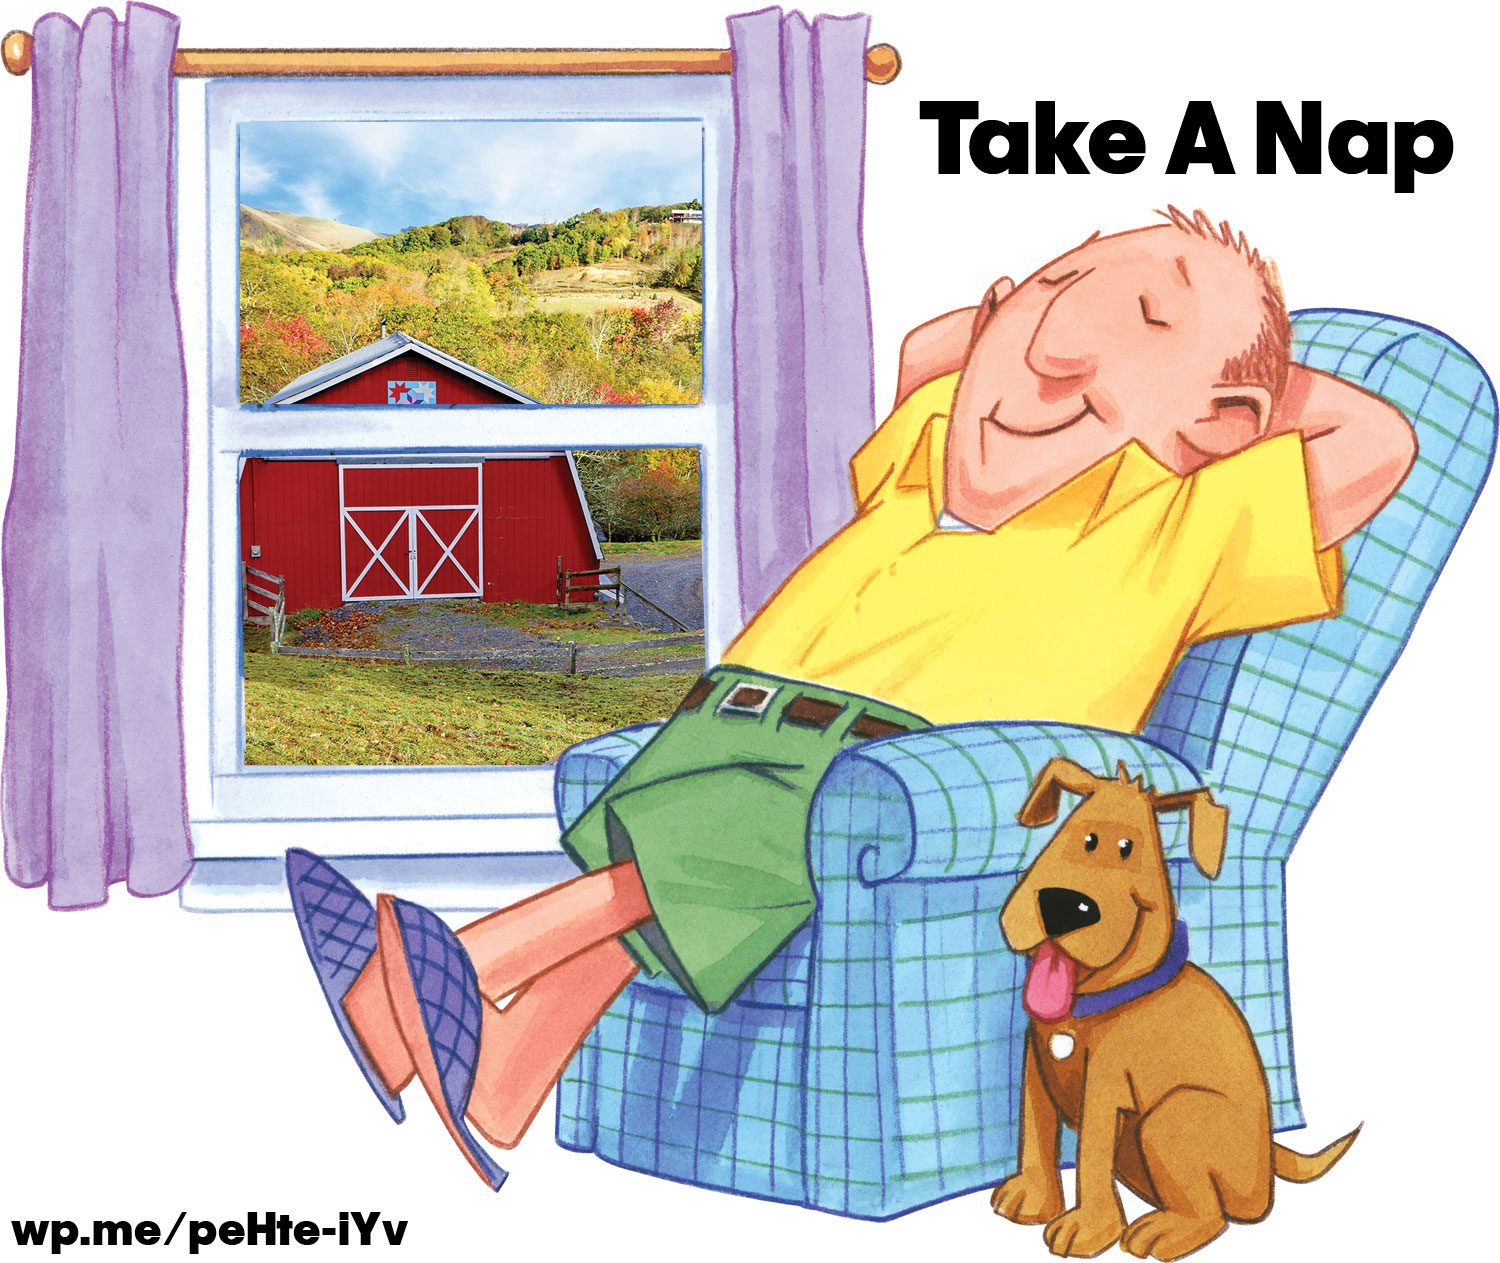 Take a nap - It's Biblical and it is good for you too. #Nap #Napping